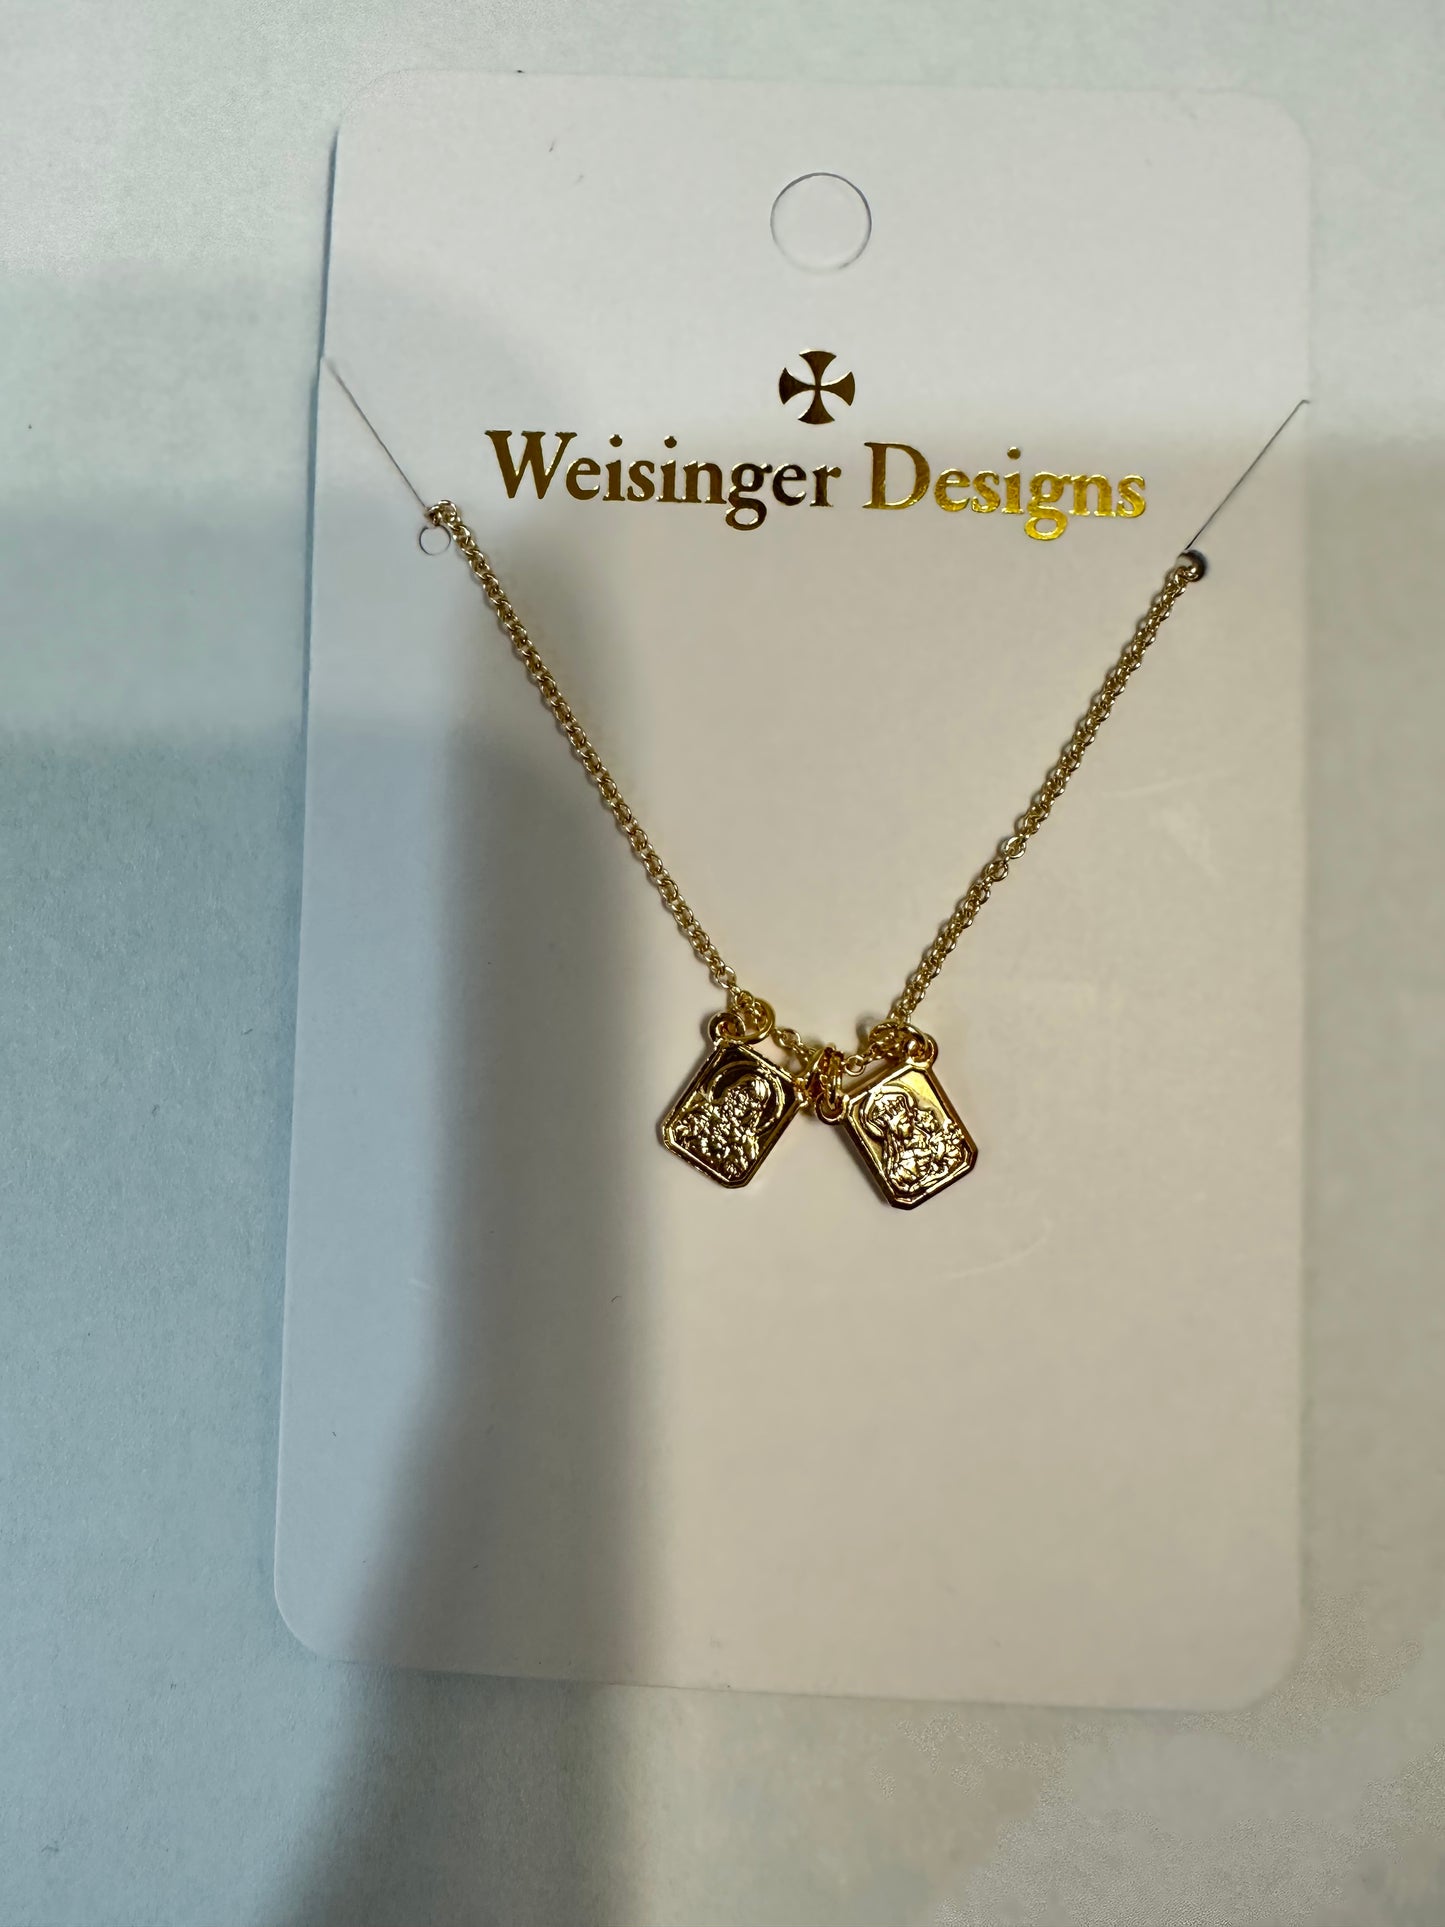 A Gold Filled Small Scapular Necklace with two small charms, symbolizing spiritual protection and guidance from Weisinger Designs.